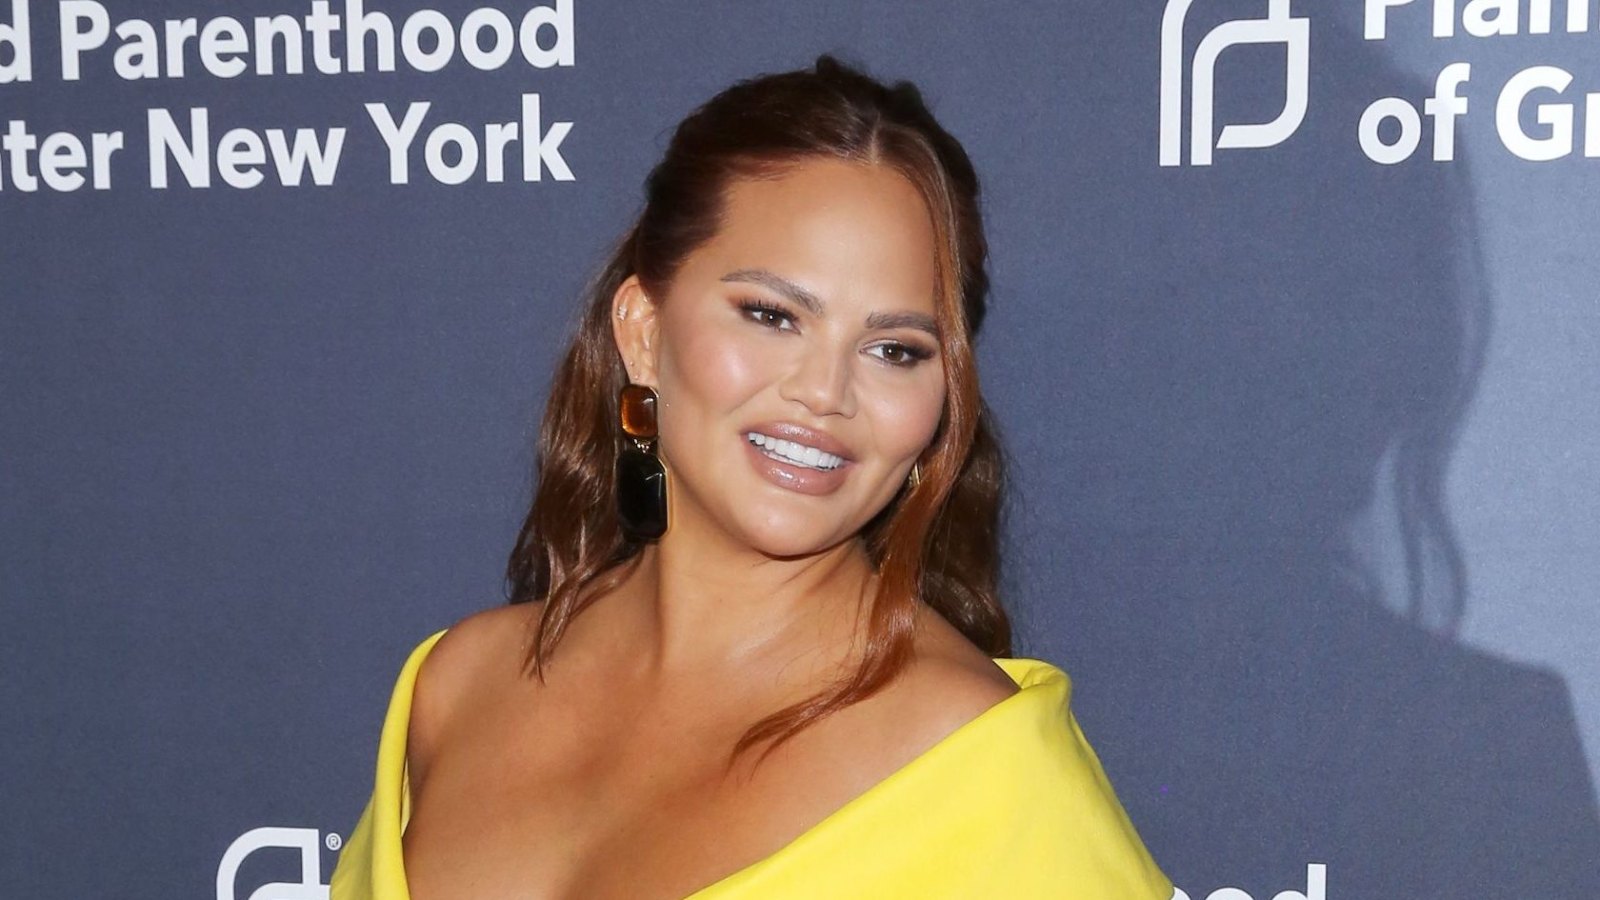 Chrissy Teigen Assures Critics That Her Daughter Is ‘Safe’ After Getting Called Out for Not Using Baby Carrier 'Right' Promo: Chrissy Teigen Responds to Critic